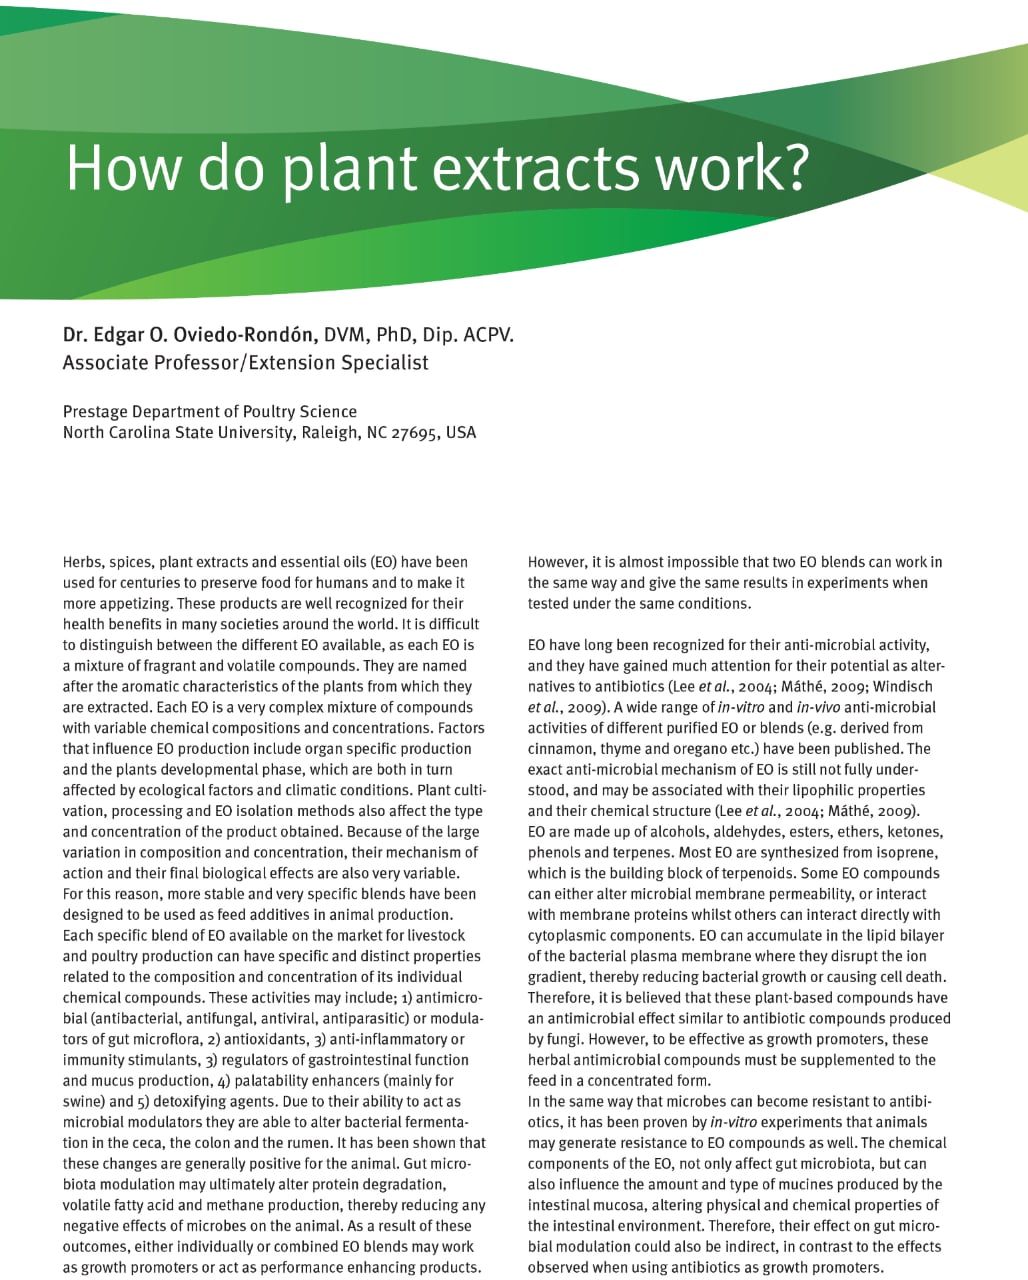 How Do Plant Extracts Work